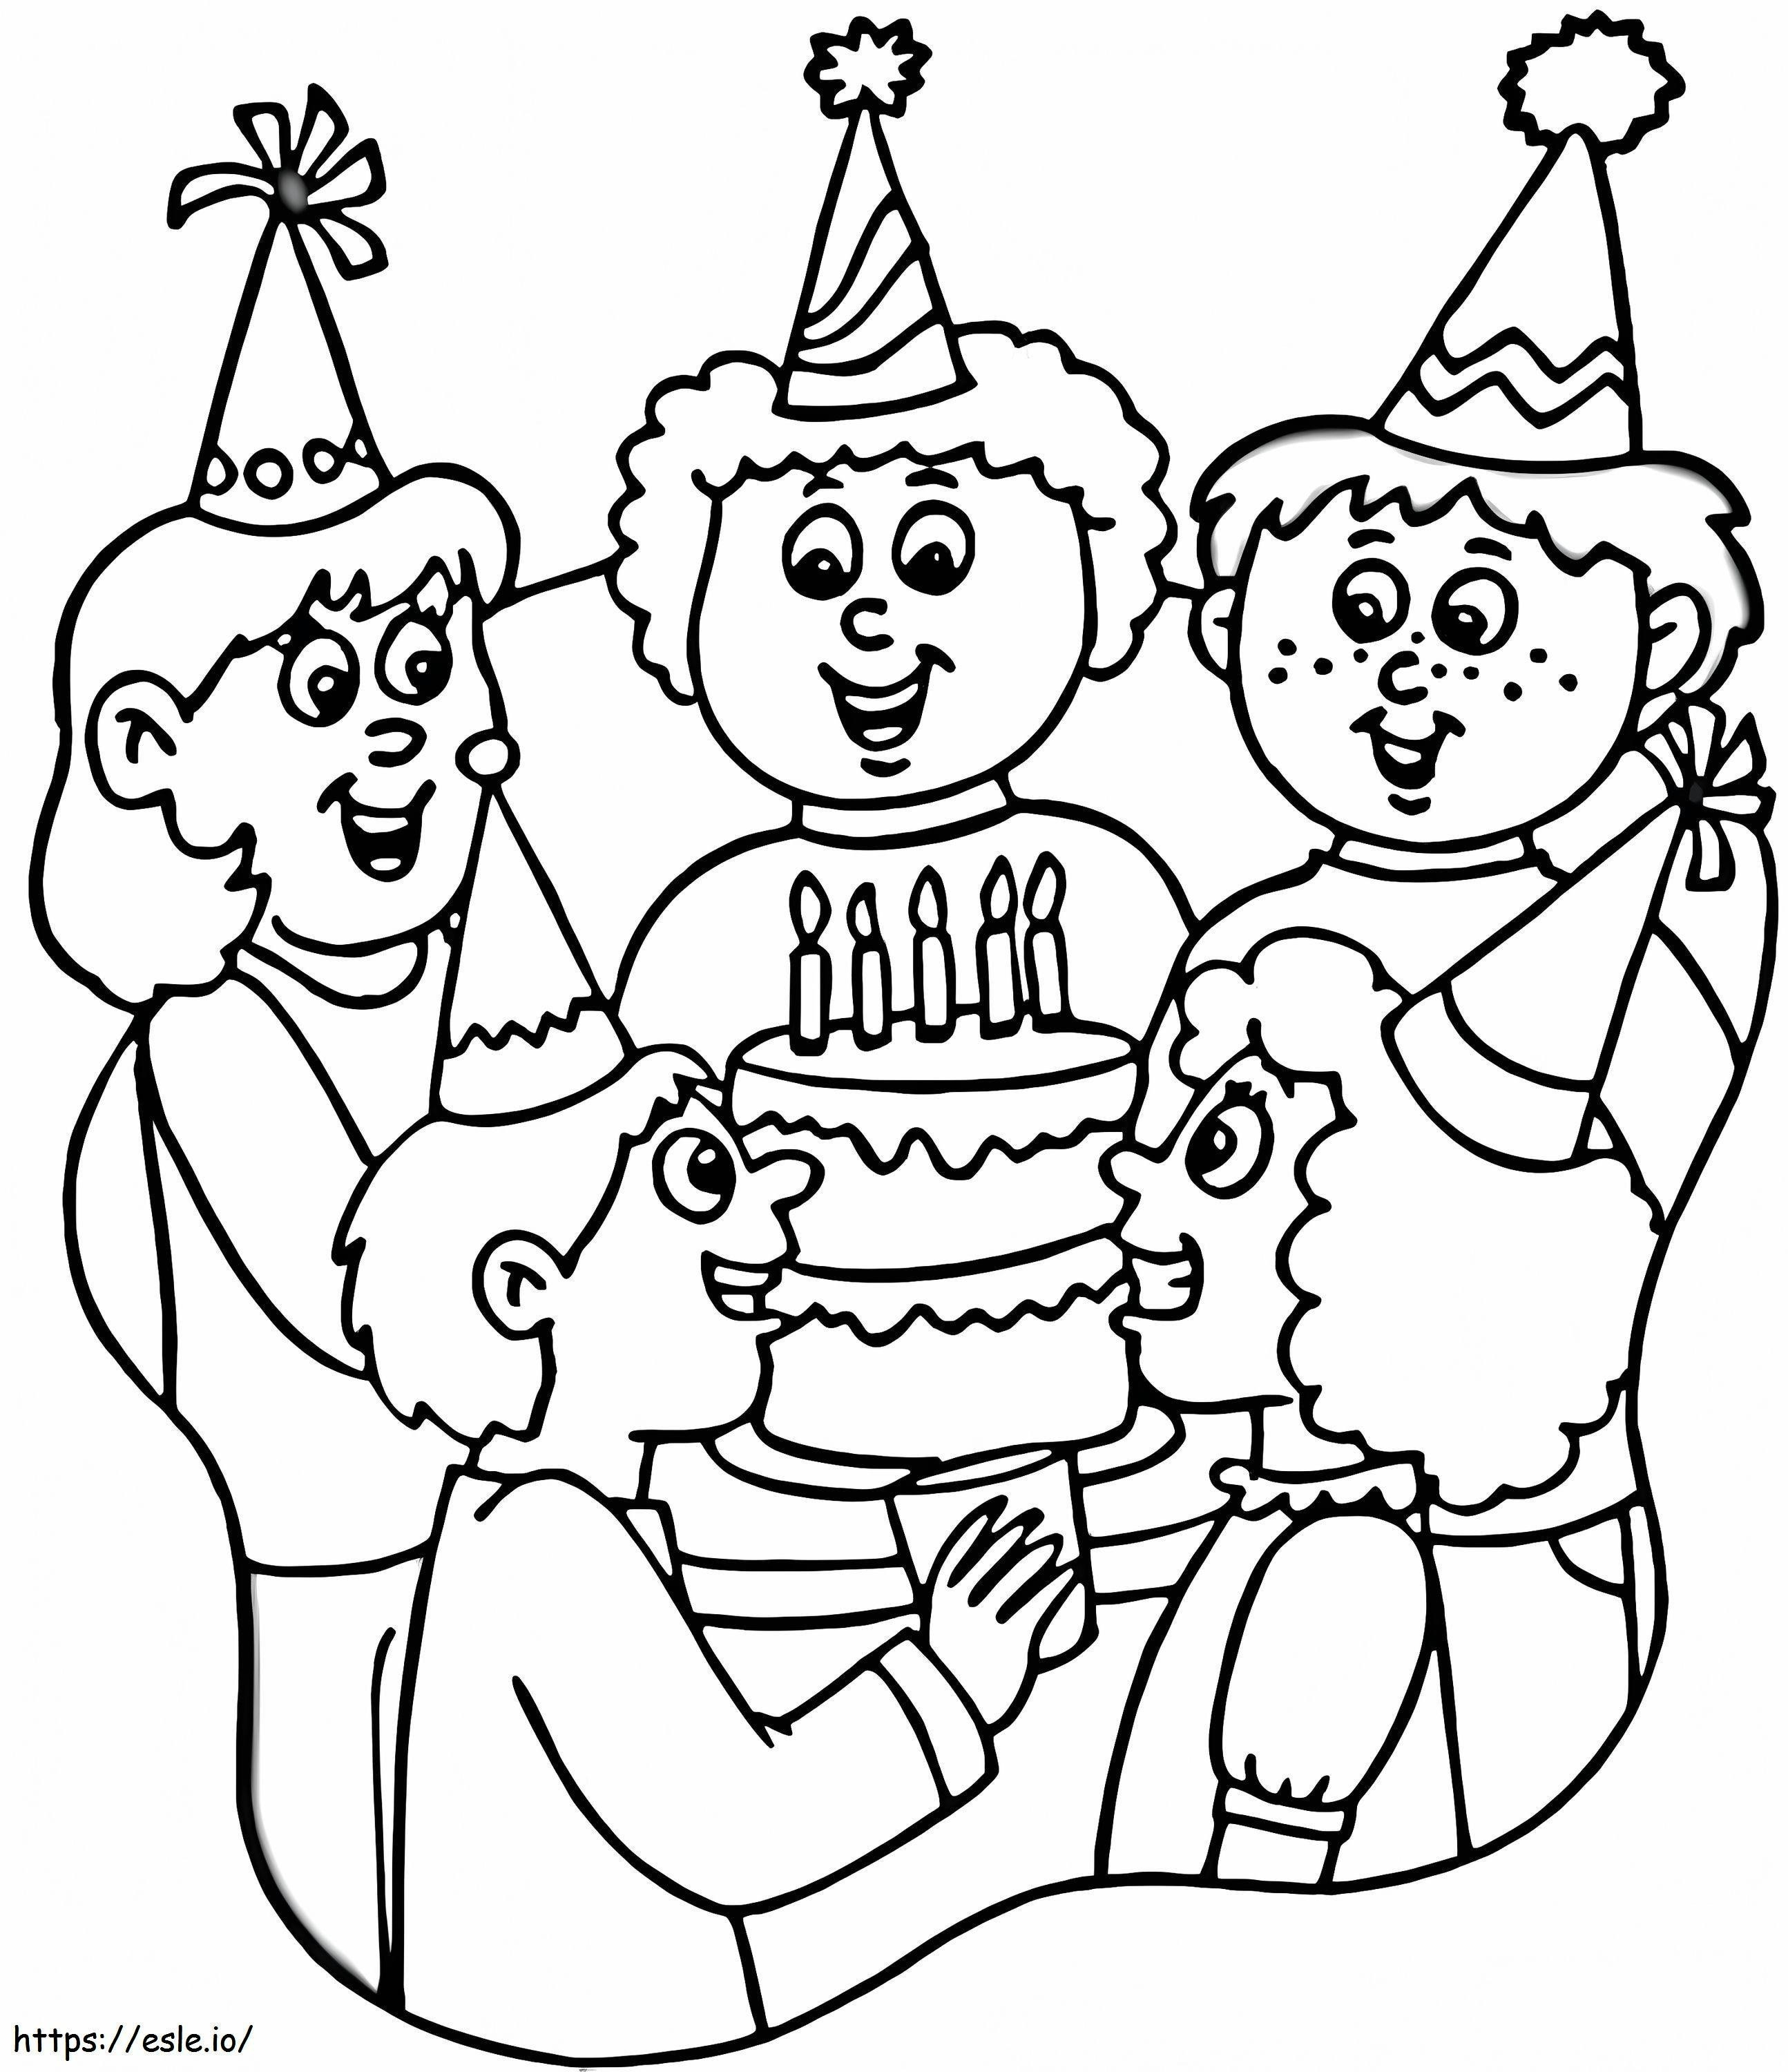 Birthday Party 1 coloring page